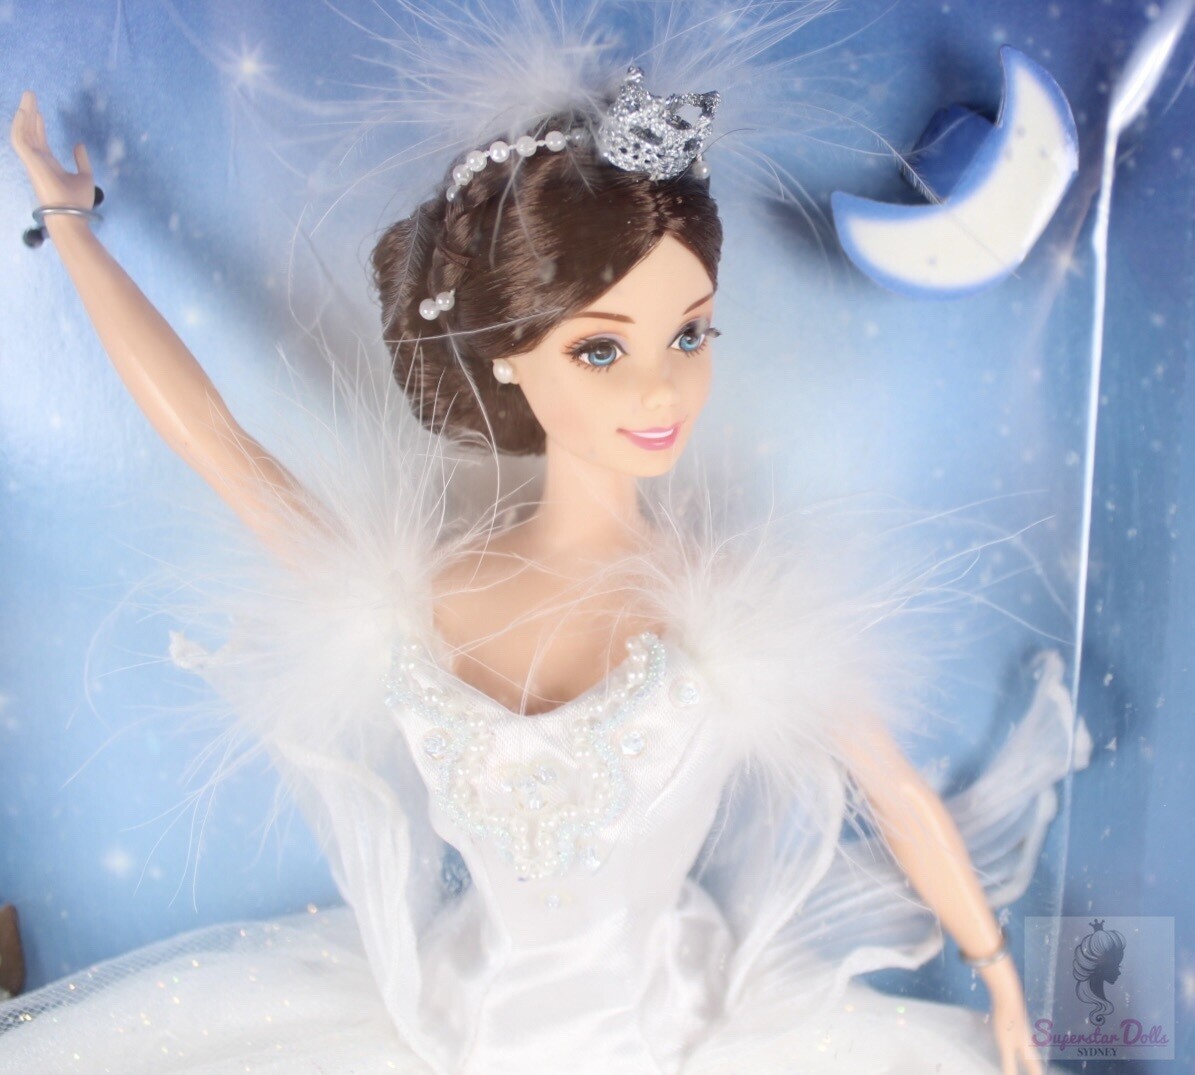 1997 Collector Edition: Barbie as The Swan Queen in Swan Lake Doll